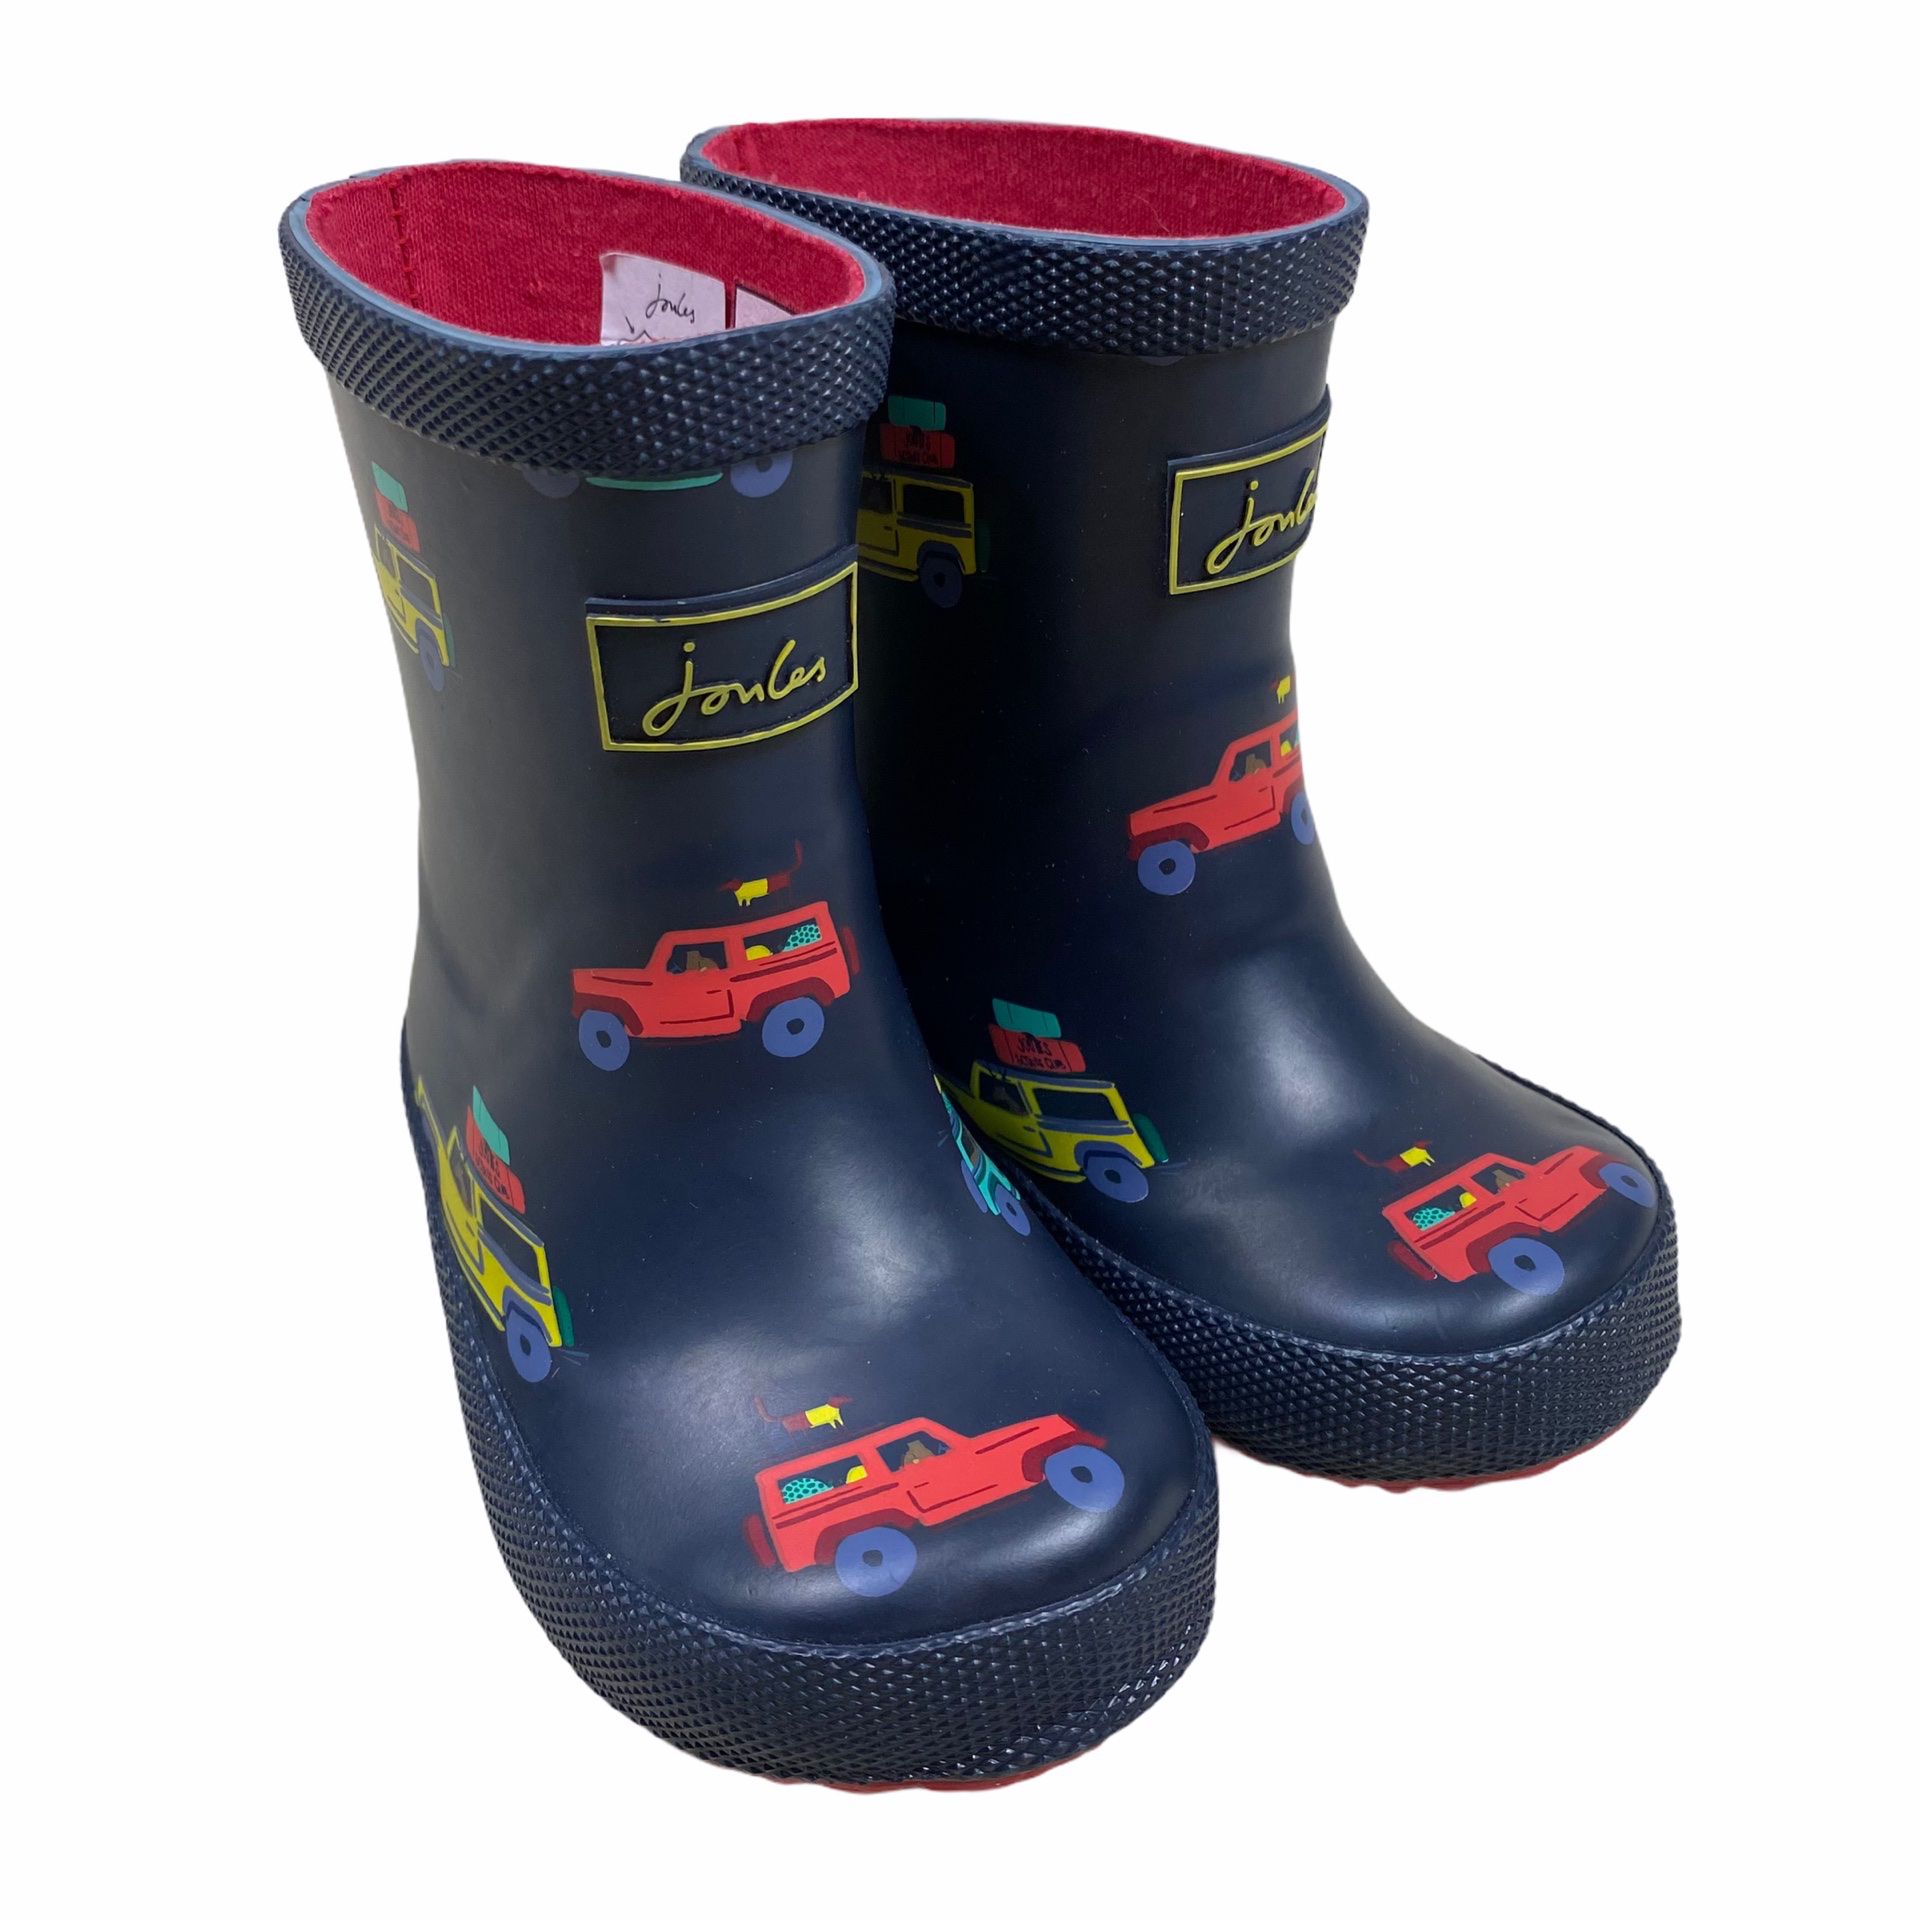 Joules Jeep Print Camping Rain Boots Size 5